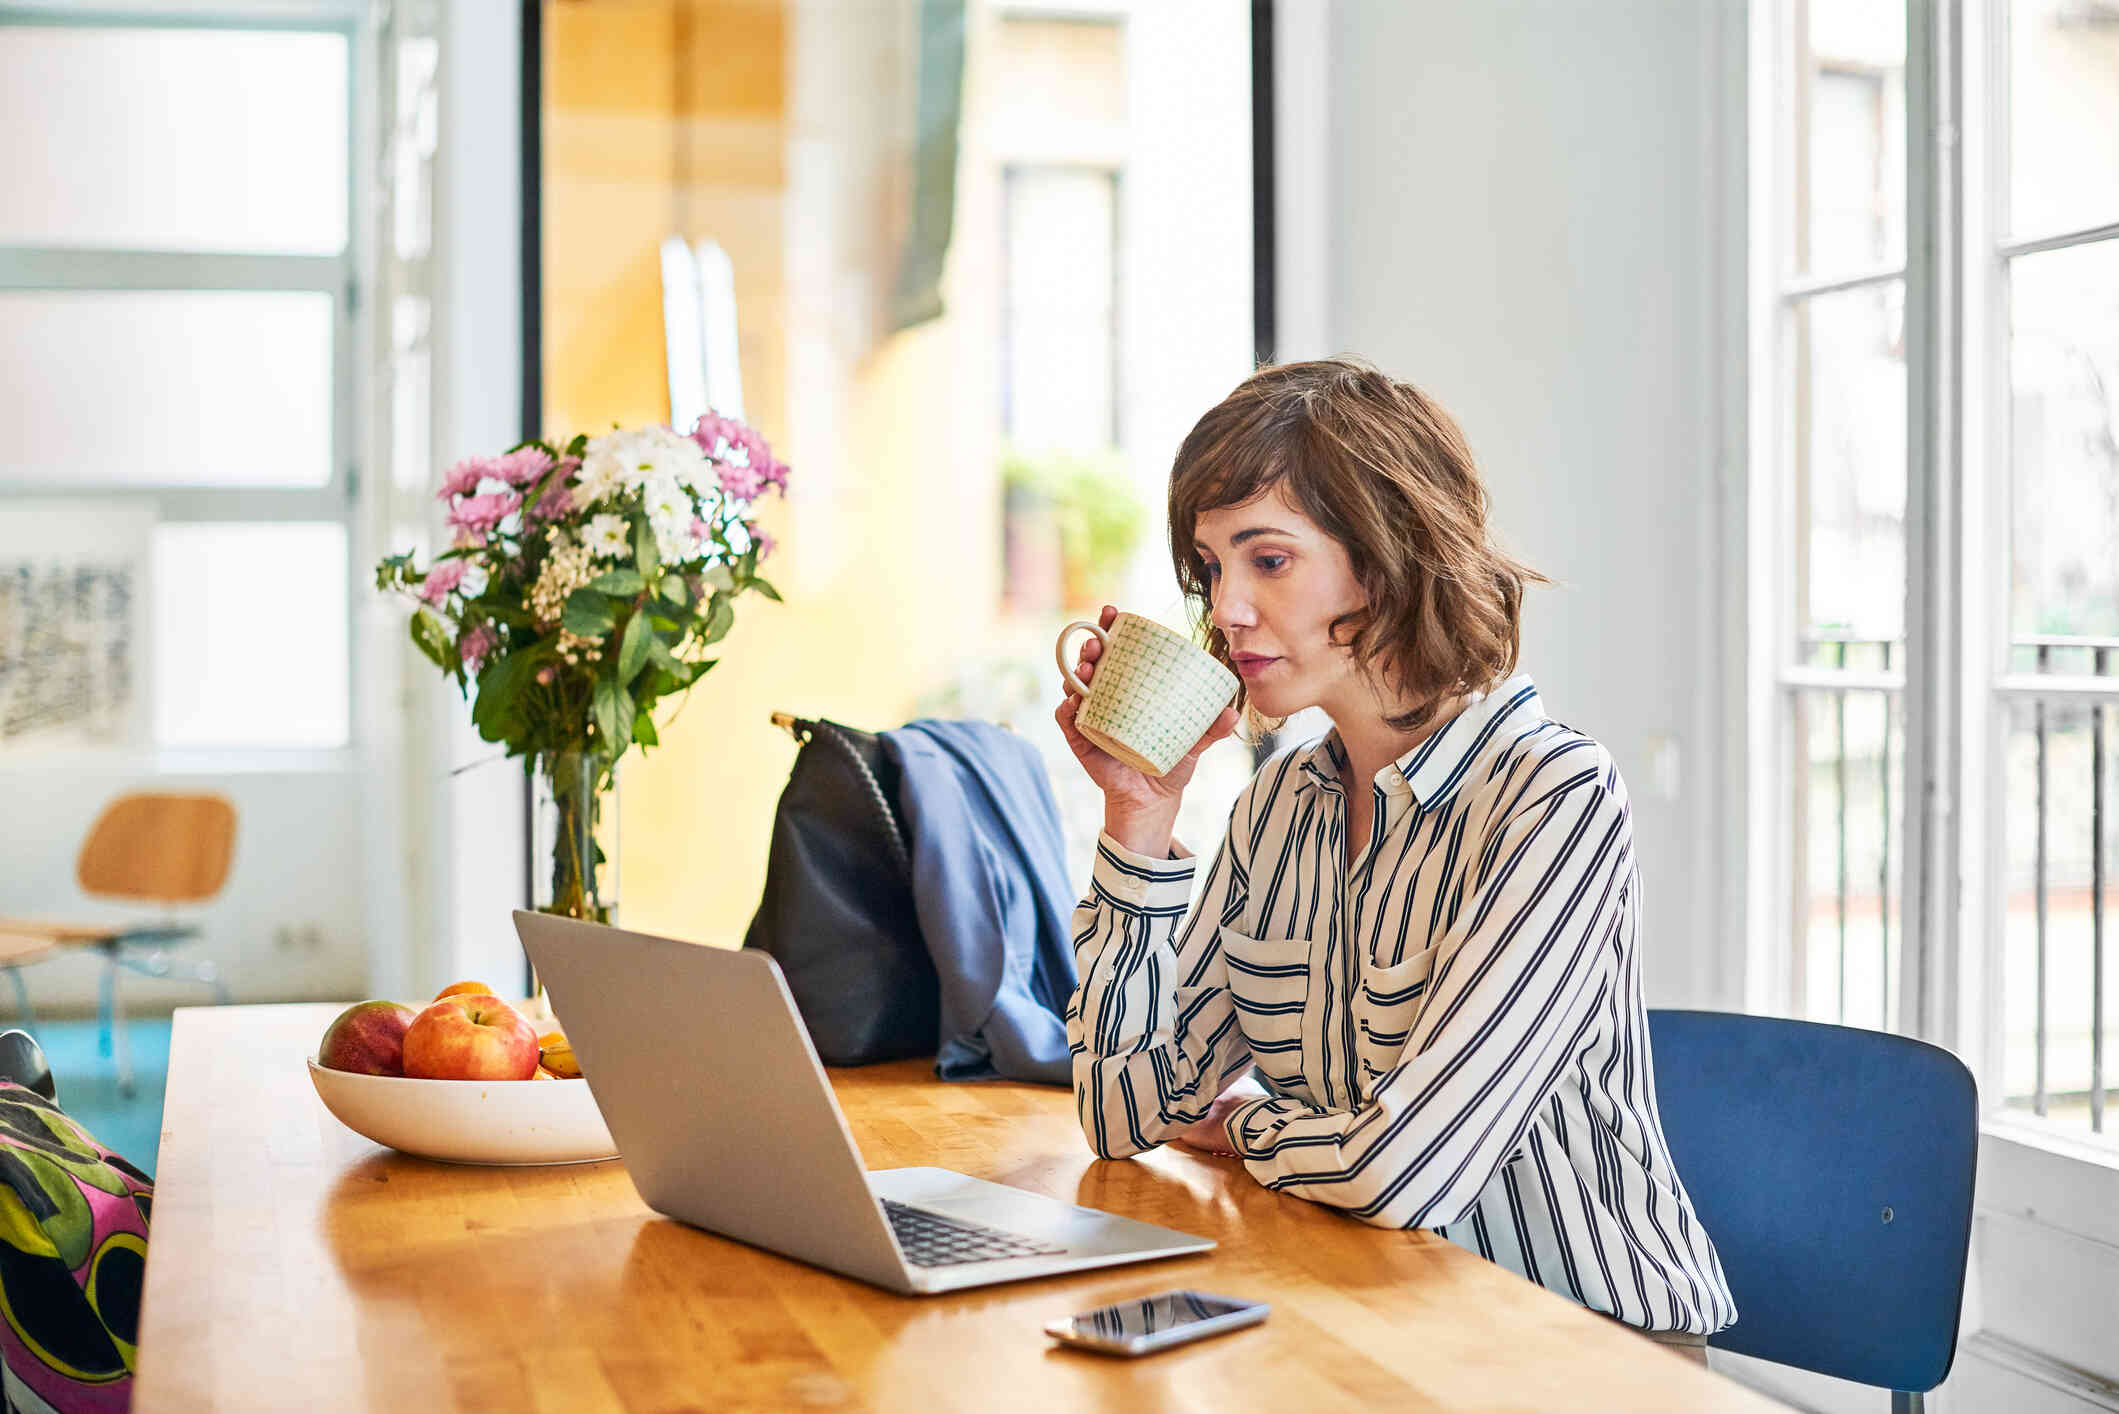 A woman in a striped shirt sits at the kitchen table and drinks from a cup of  coffee while looking at the open laptop infront of her.